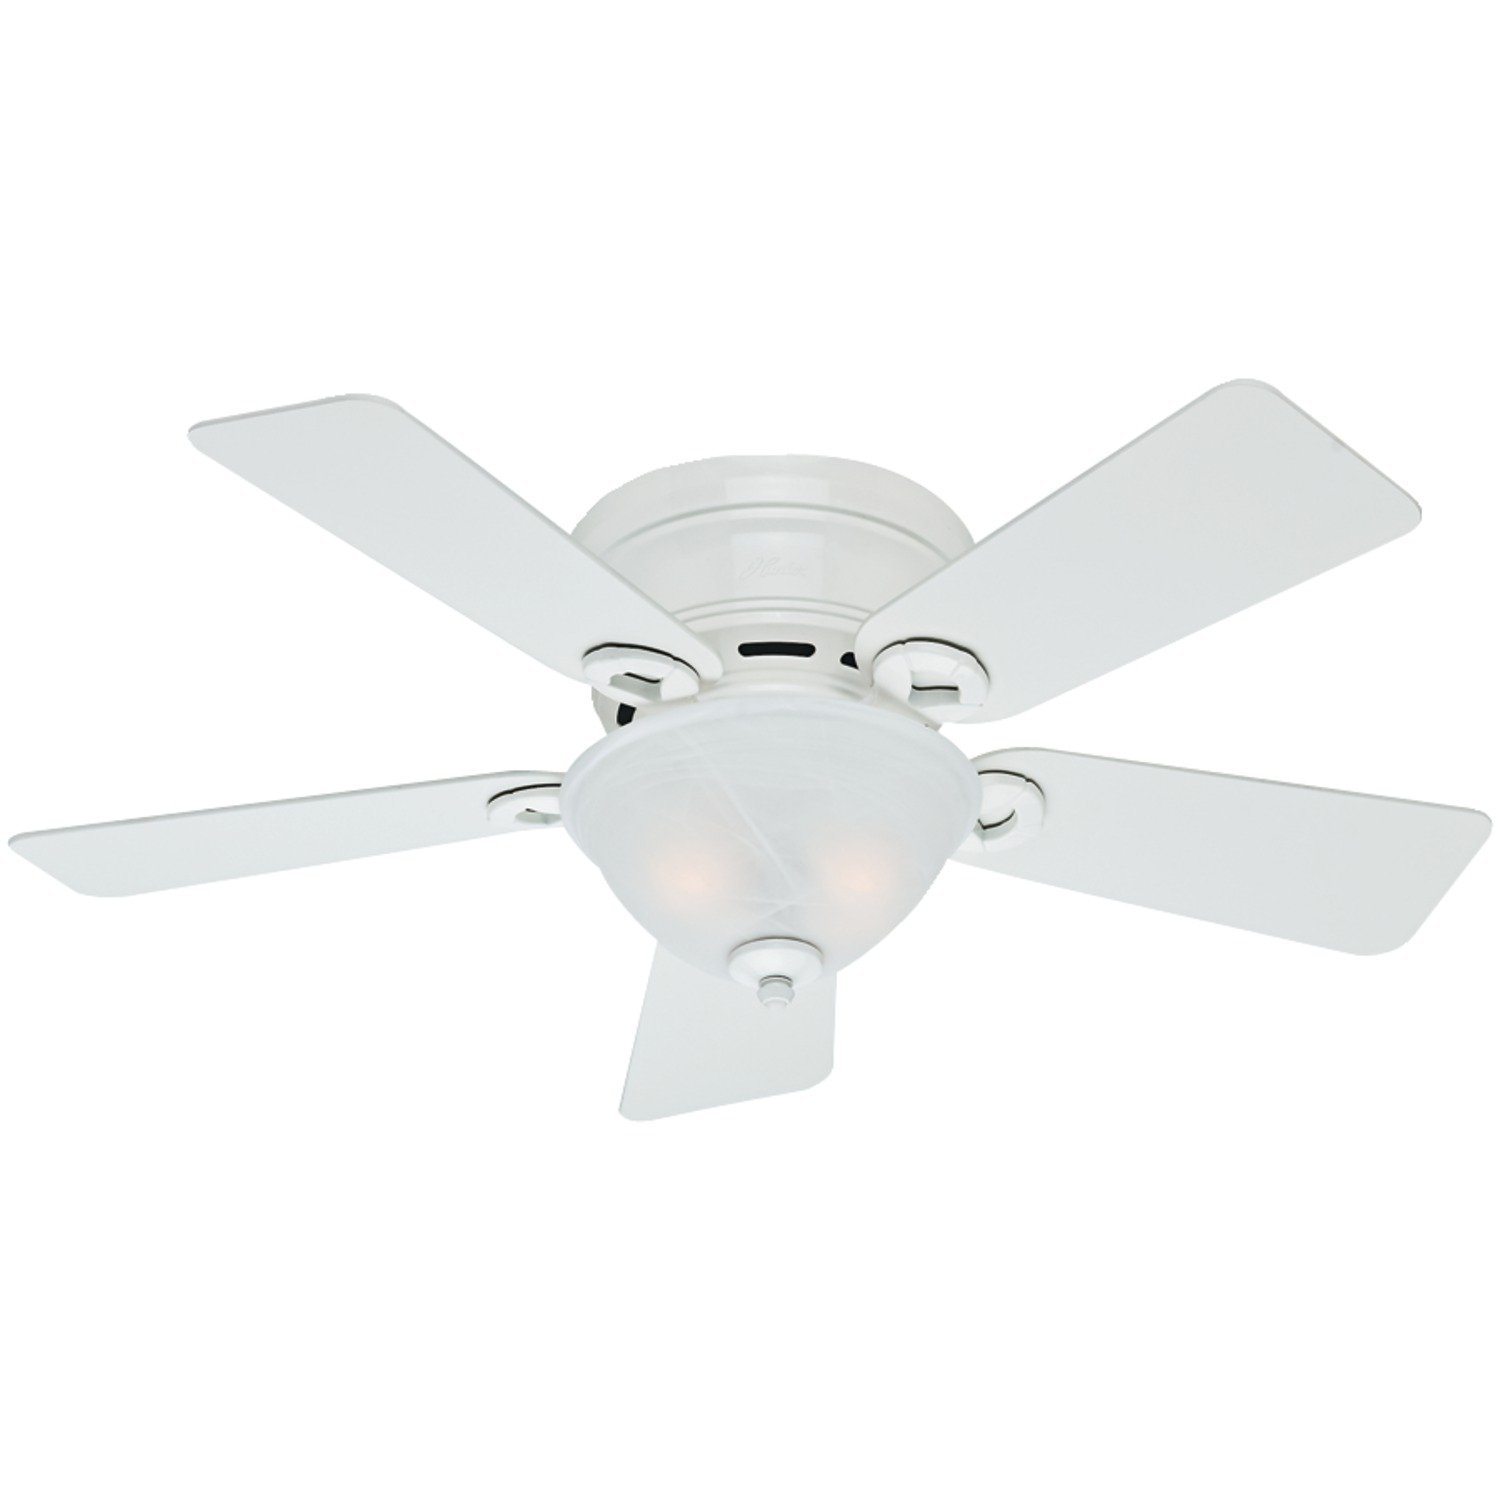 Hunter Fan Company 51022 Conroy 42-Inch Snow White Ceiling Fan with Five Snow White Blades and a Light Kit